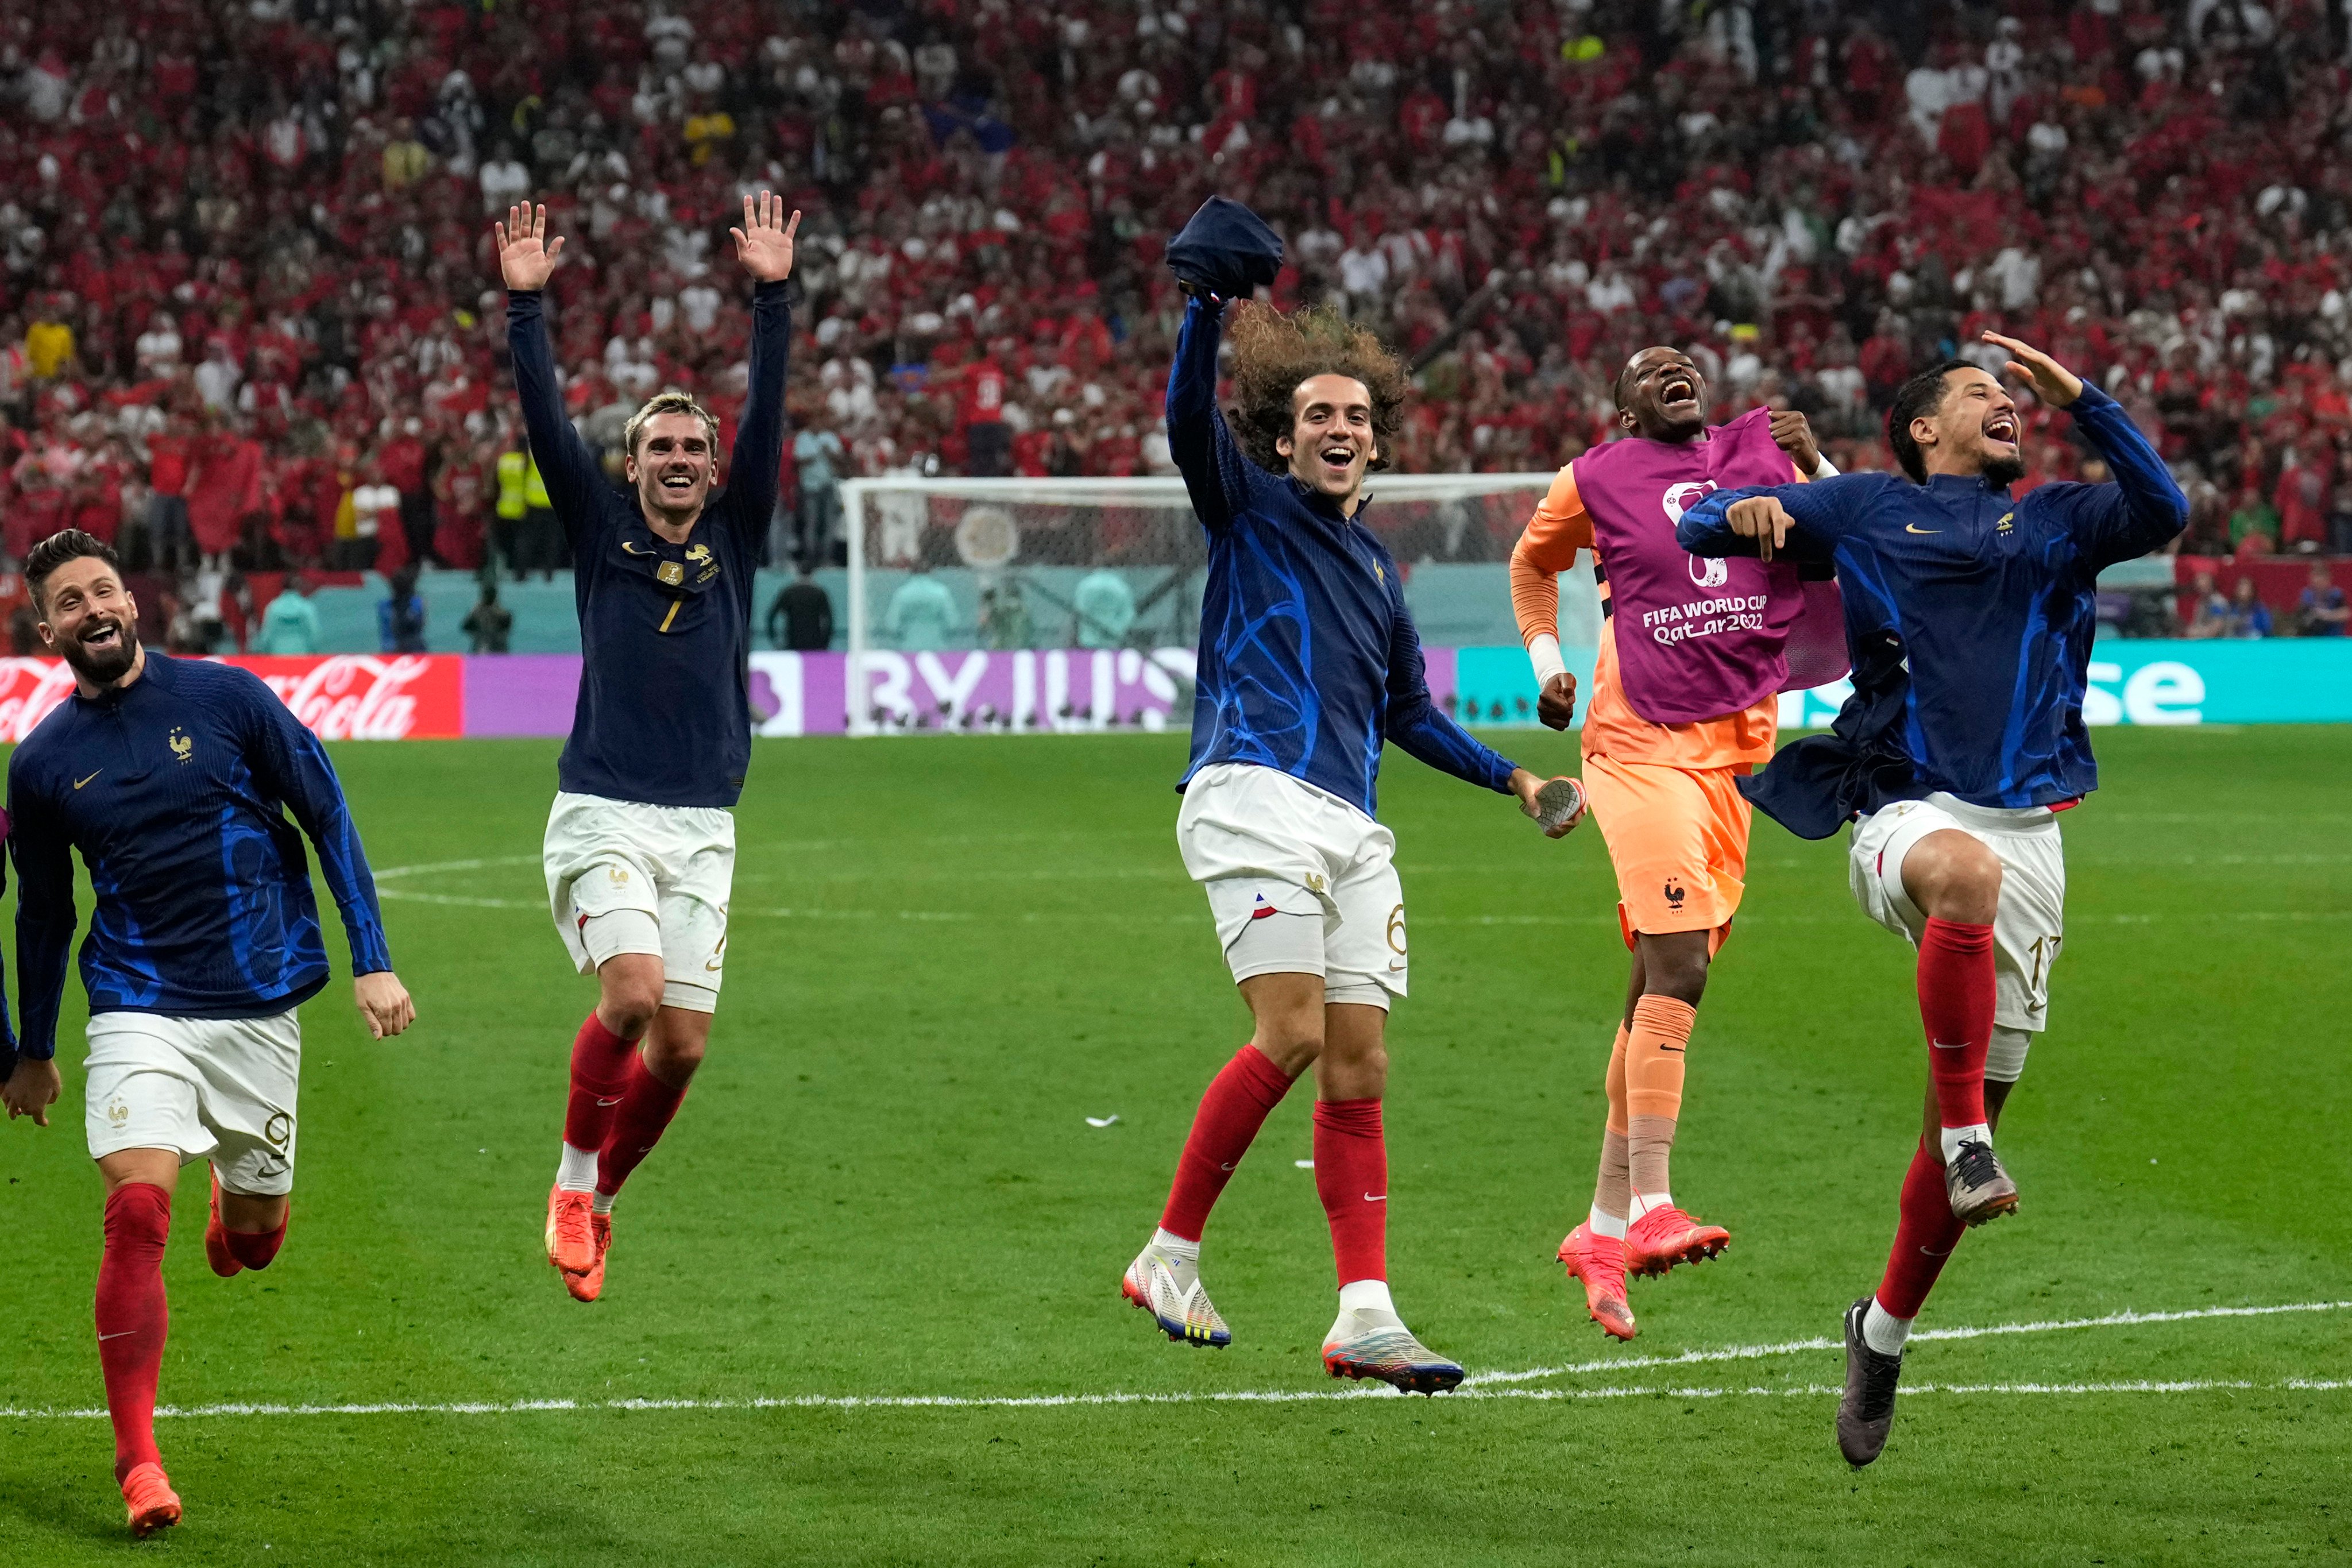 The French players celebrate their World Cup semi-final win over Morocco in Qatar on Wednesday. Photo: AP